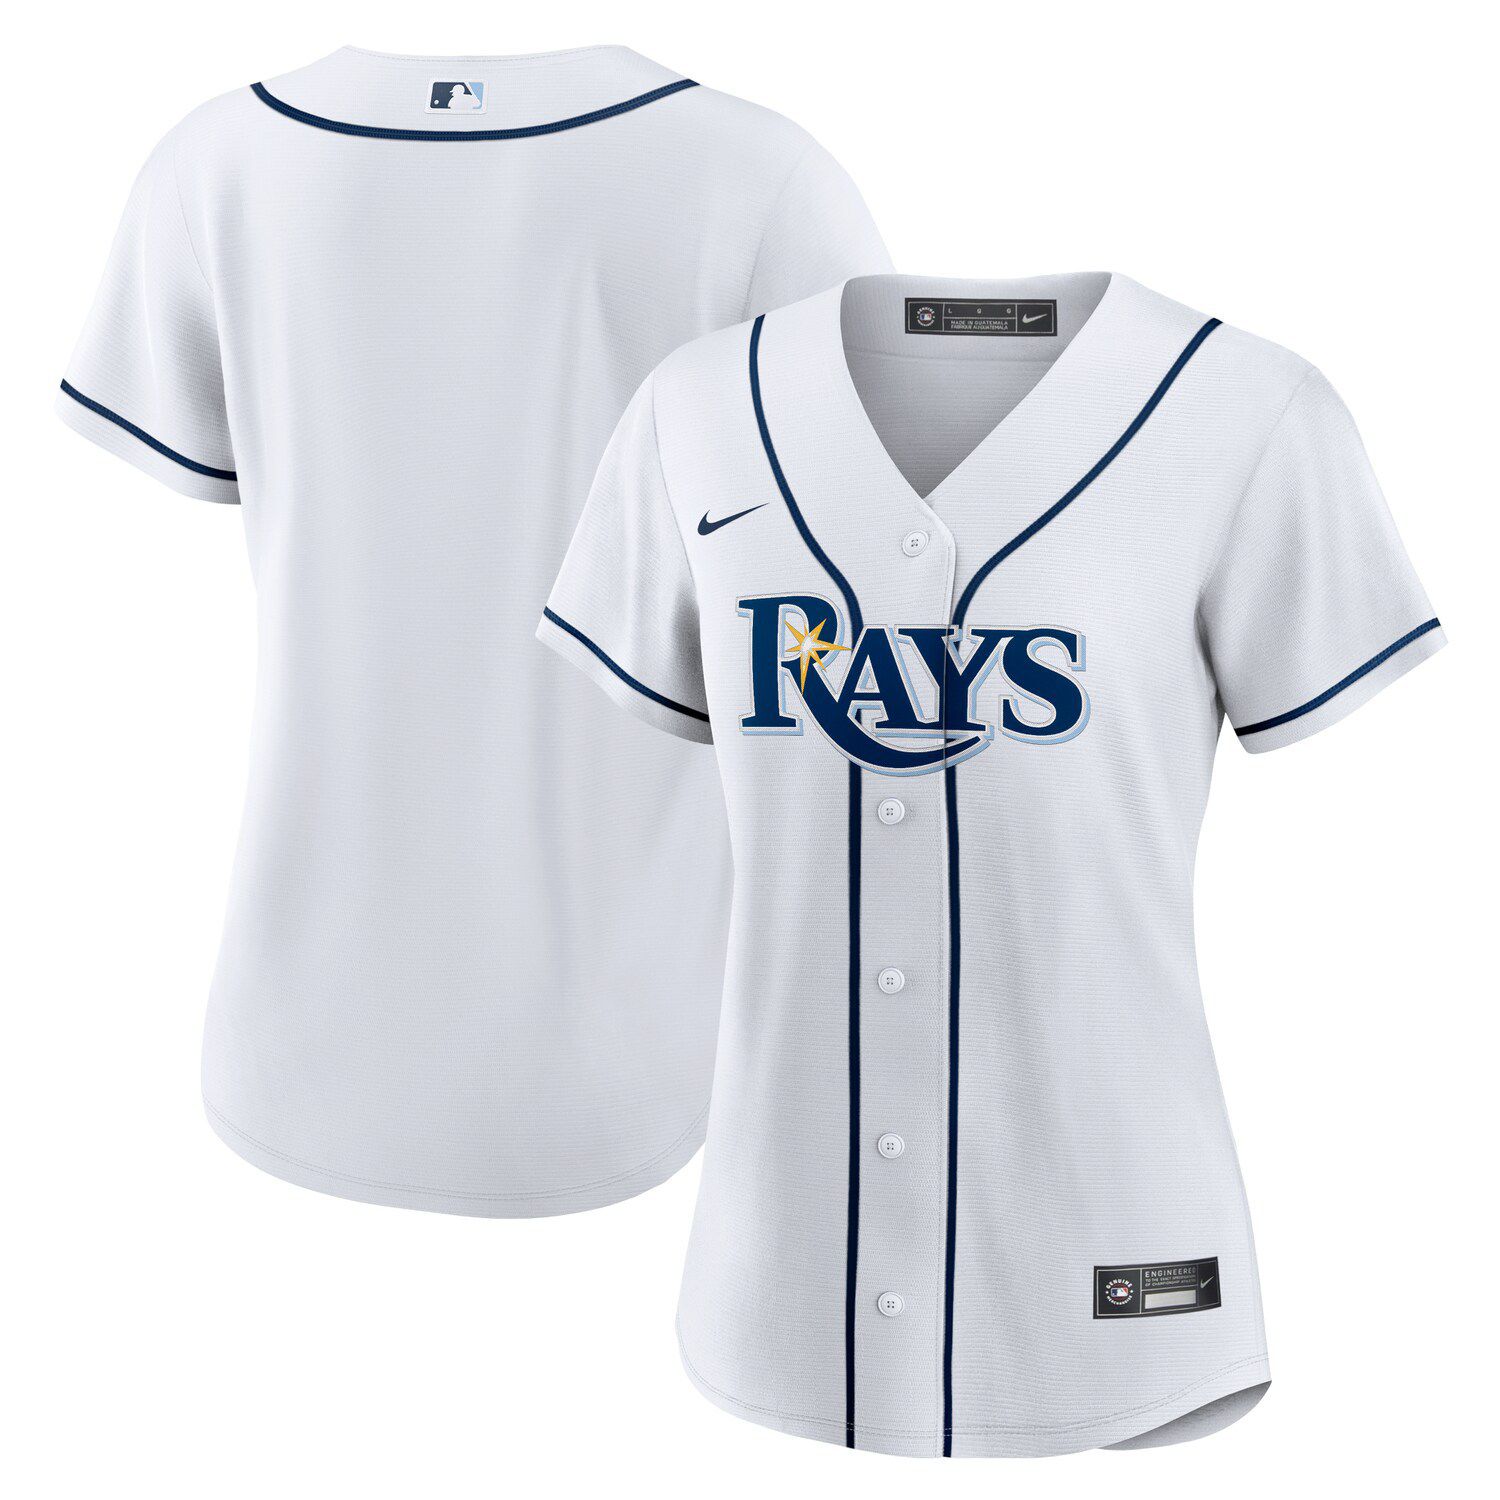 blake snell youth jersey